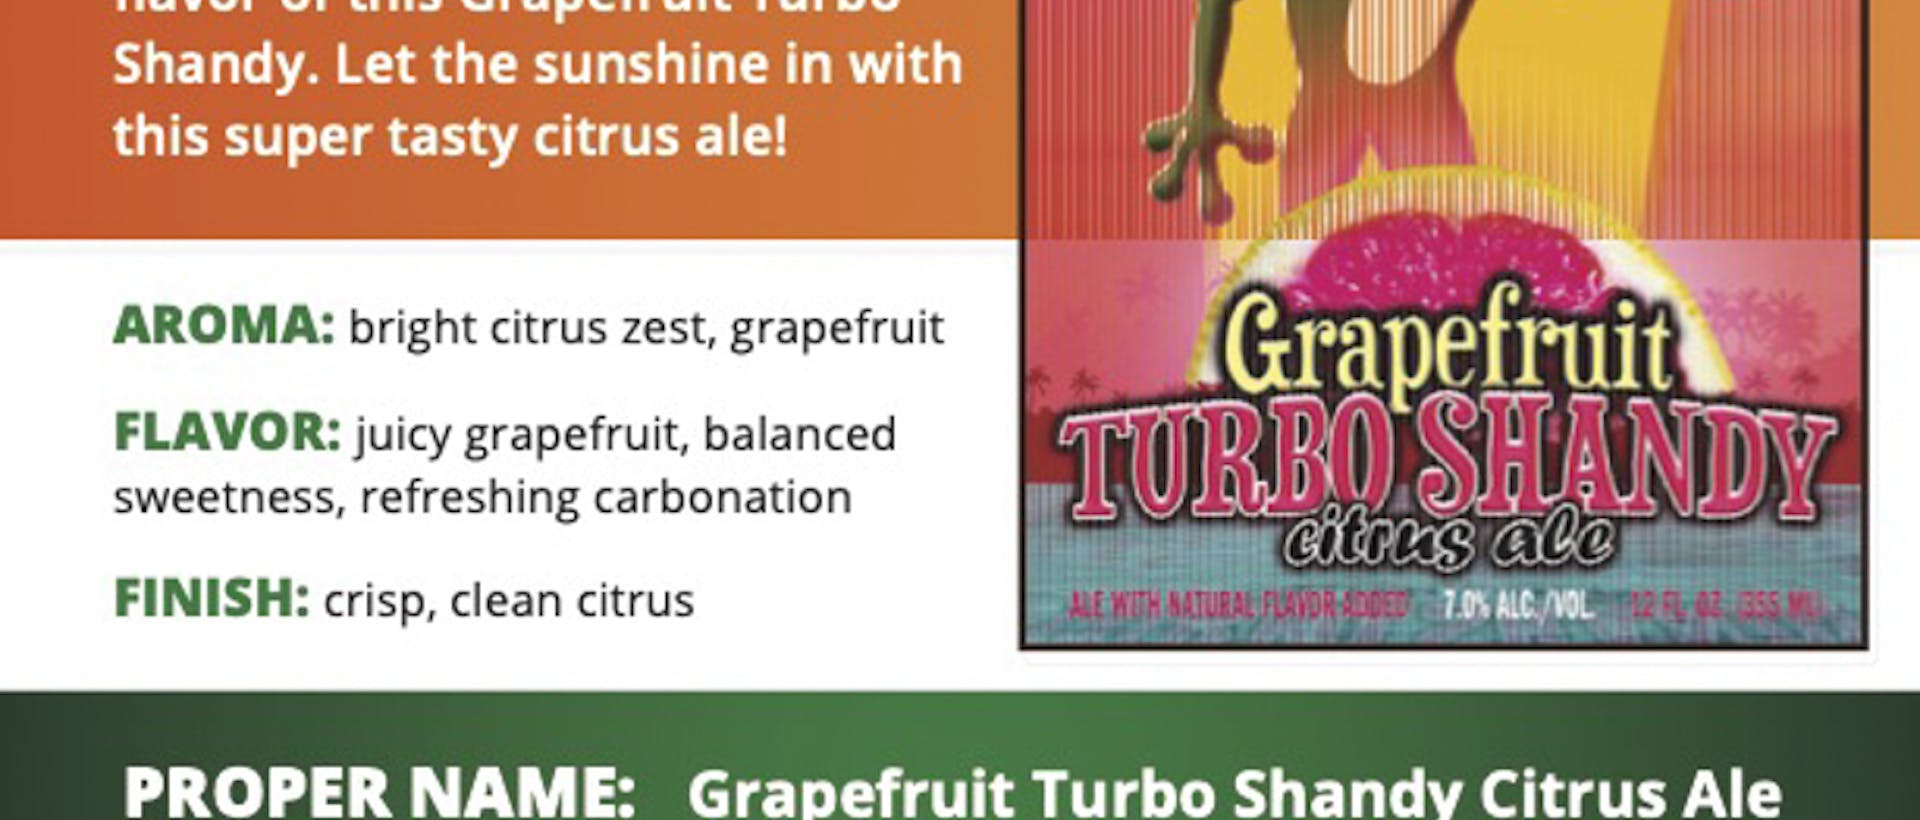 HF_Sell Sheet - Shandy Series - Grapefruit Turbo Shandy Citrus Ale (updated 01-19-2022)